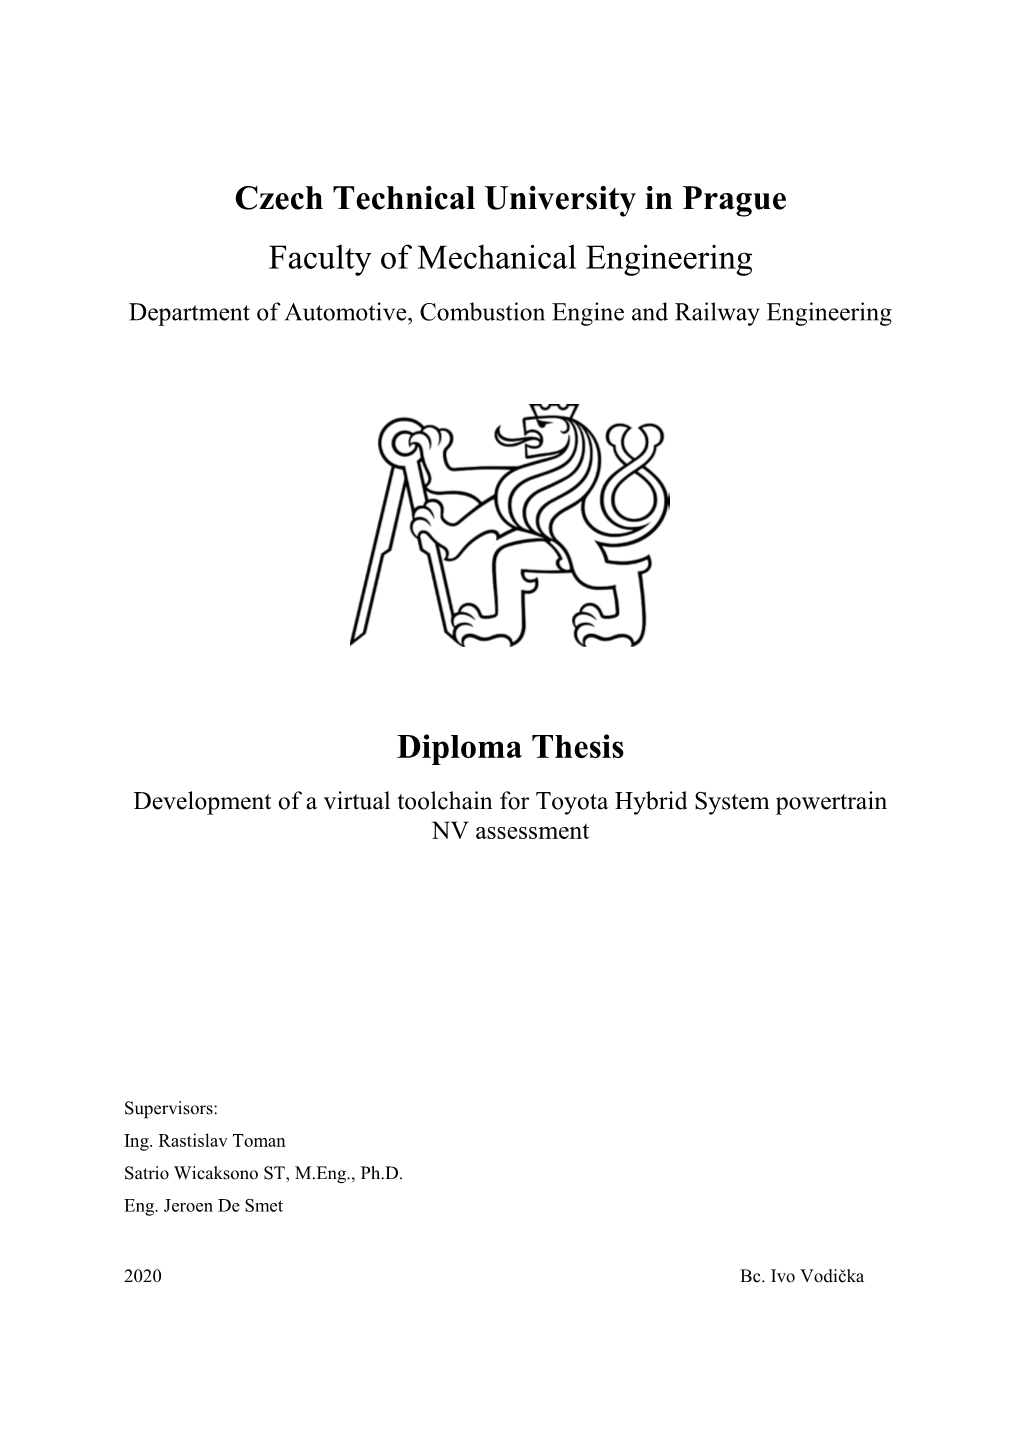 Diploma Thesis Development of a Virtual Toolchain for Toyota Hybrid System Powertrain NV Assessment